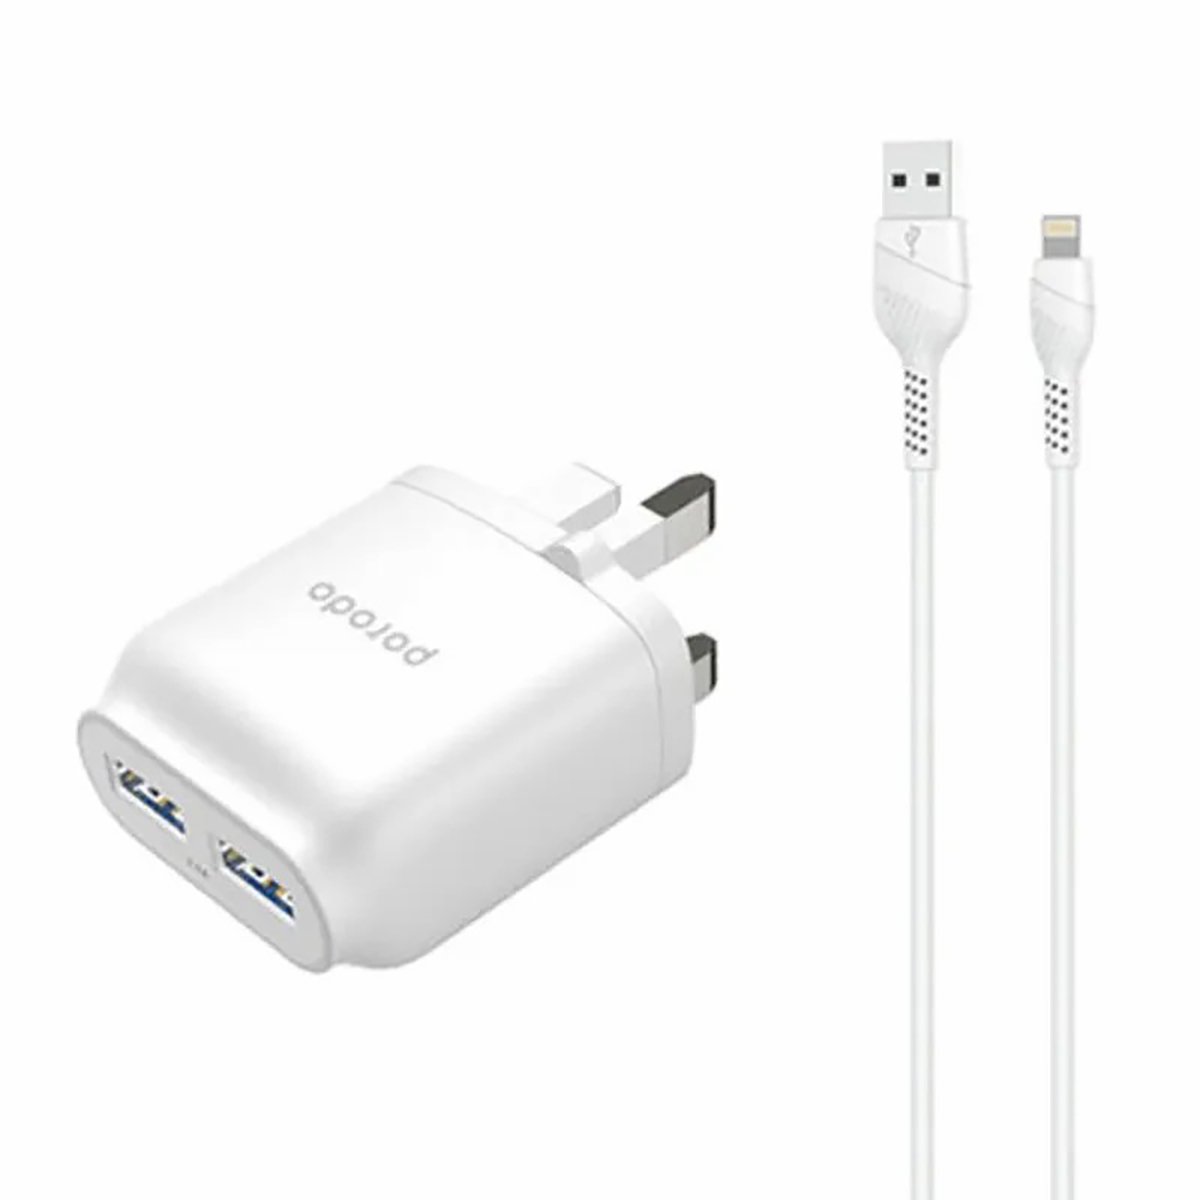 Porodo Dual Port Wall Charger PD-0203LU2-WH White